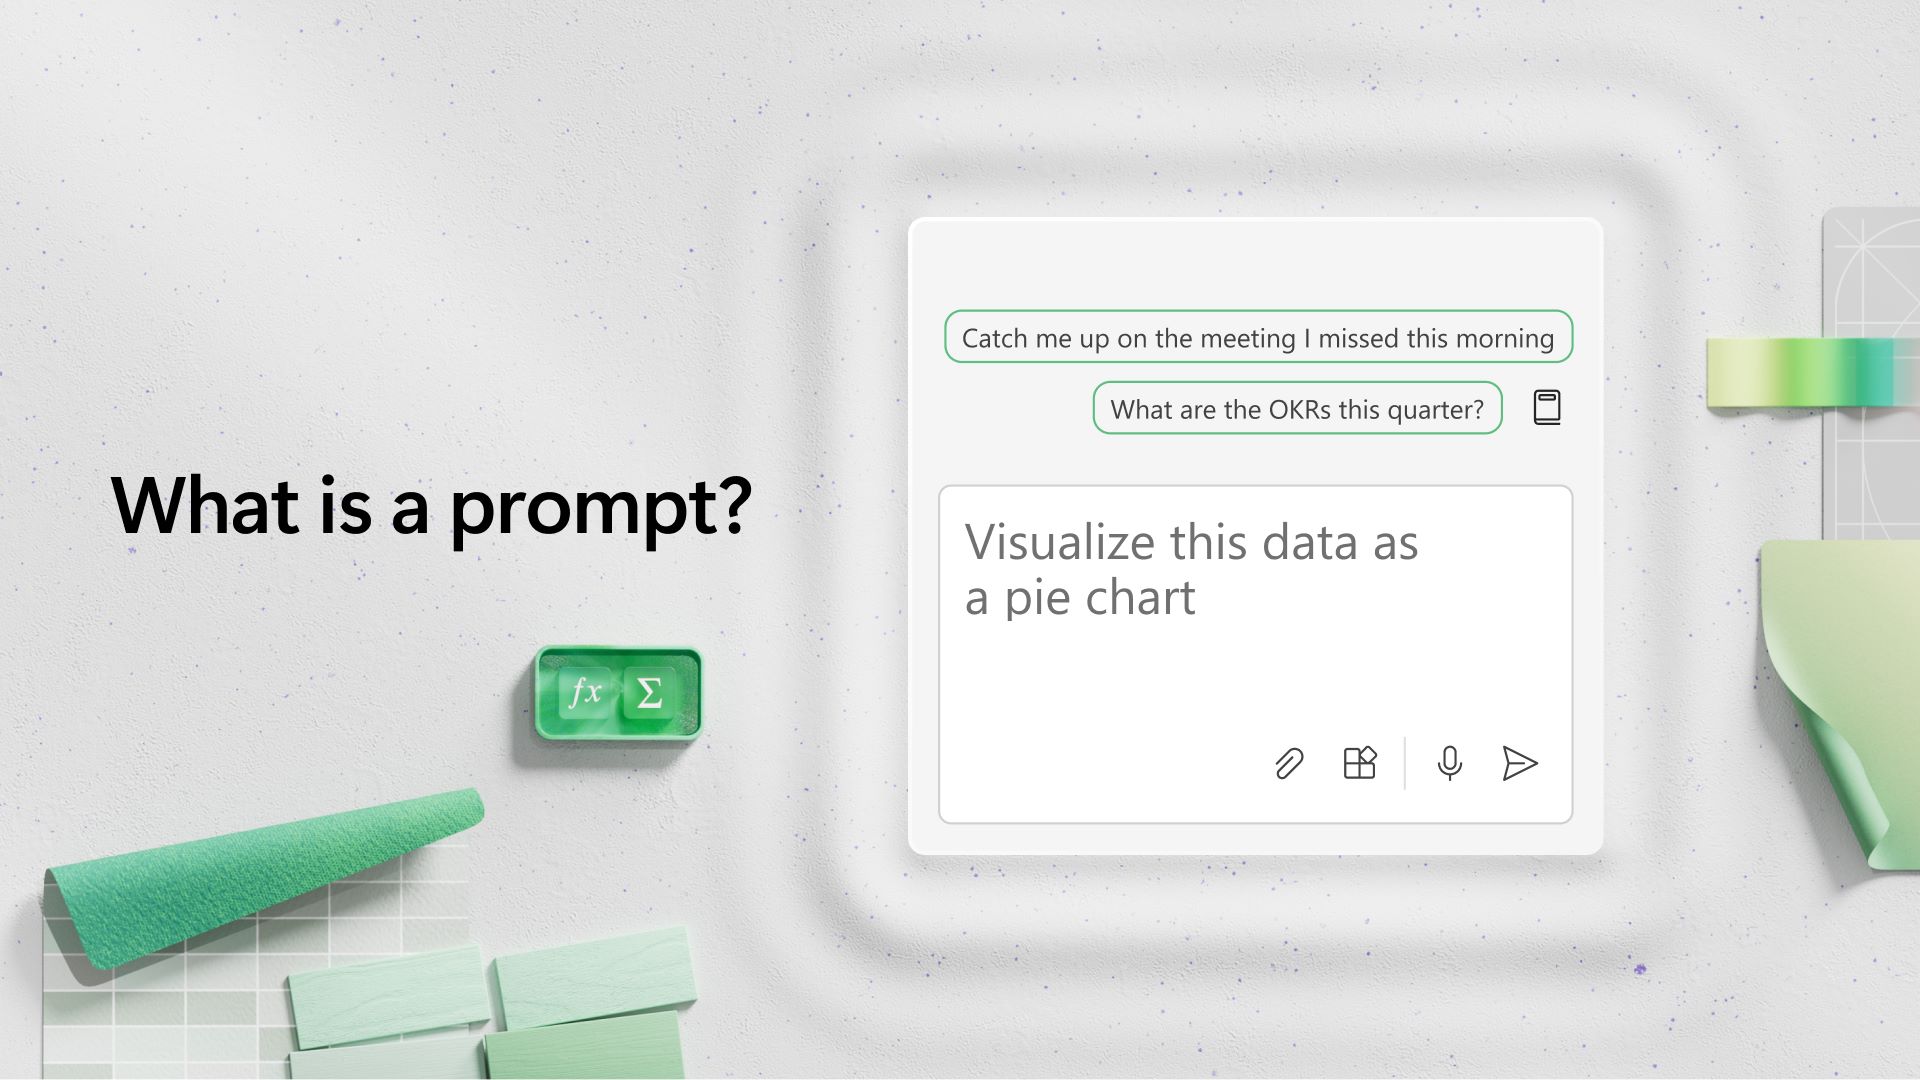 Video: What is a prompt?